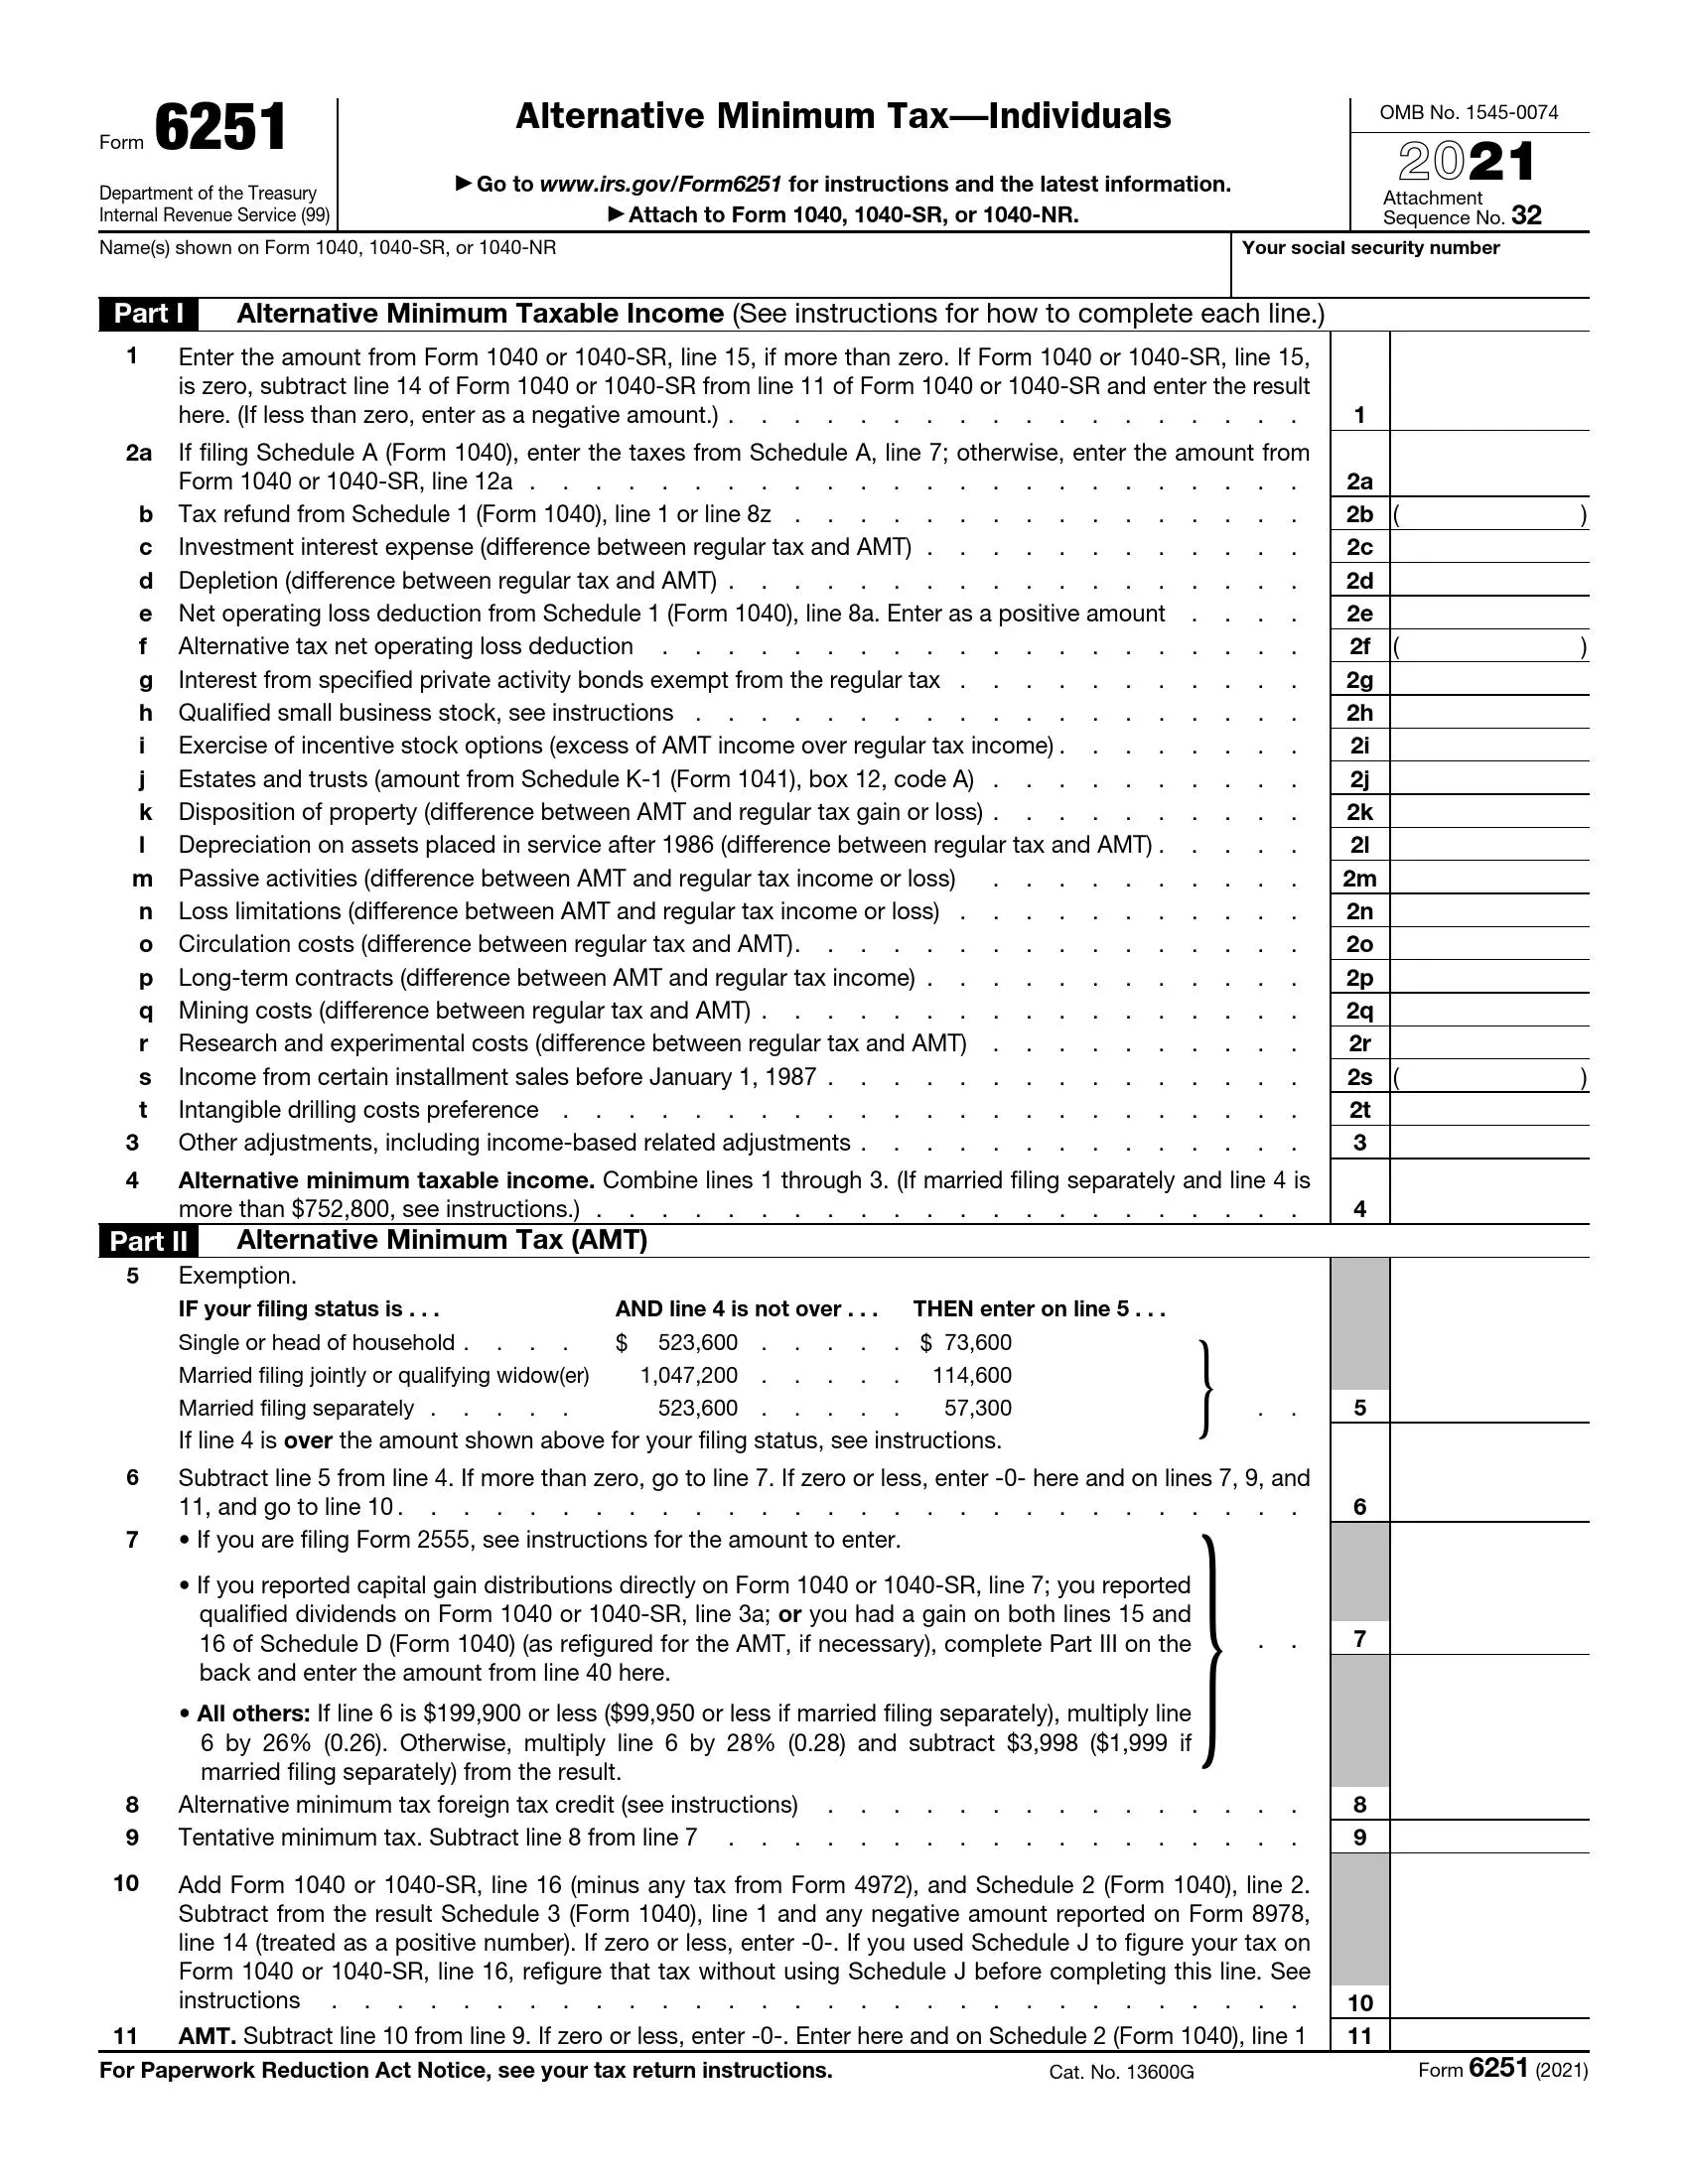 irs form 6251 2021 preview